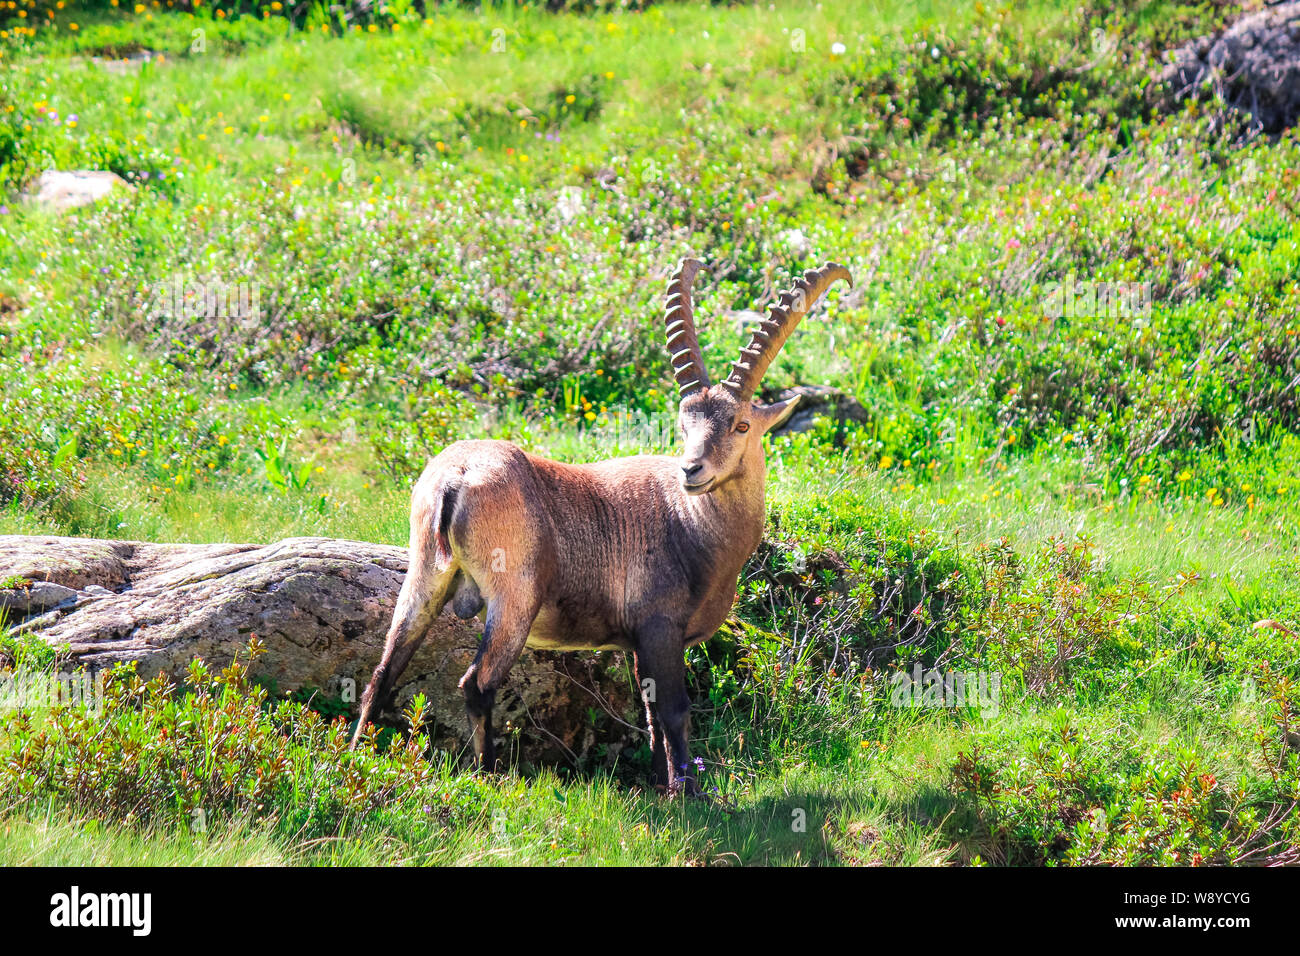 Male of Alpine ibex standing on green pasture near Chamonix in French Alps.  Wild goat, horns. Also known as the steinbock, bouquetin, or simply ibex. Wildlife  animals. Species. Mountain animals Stock Photo -